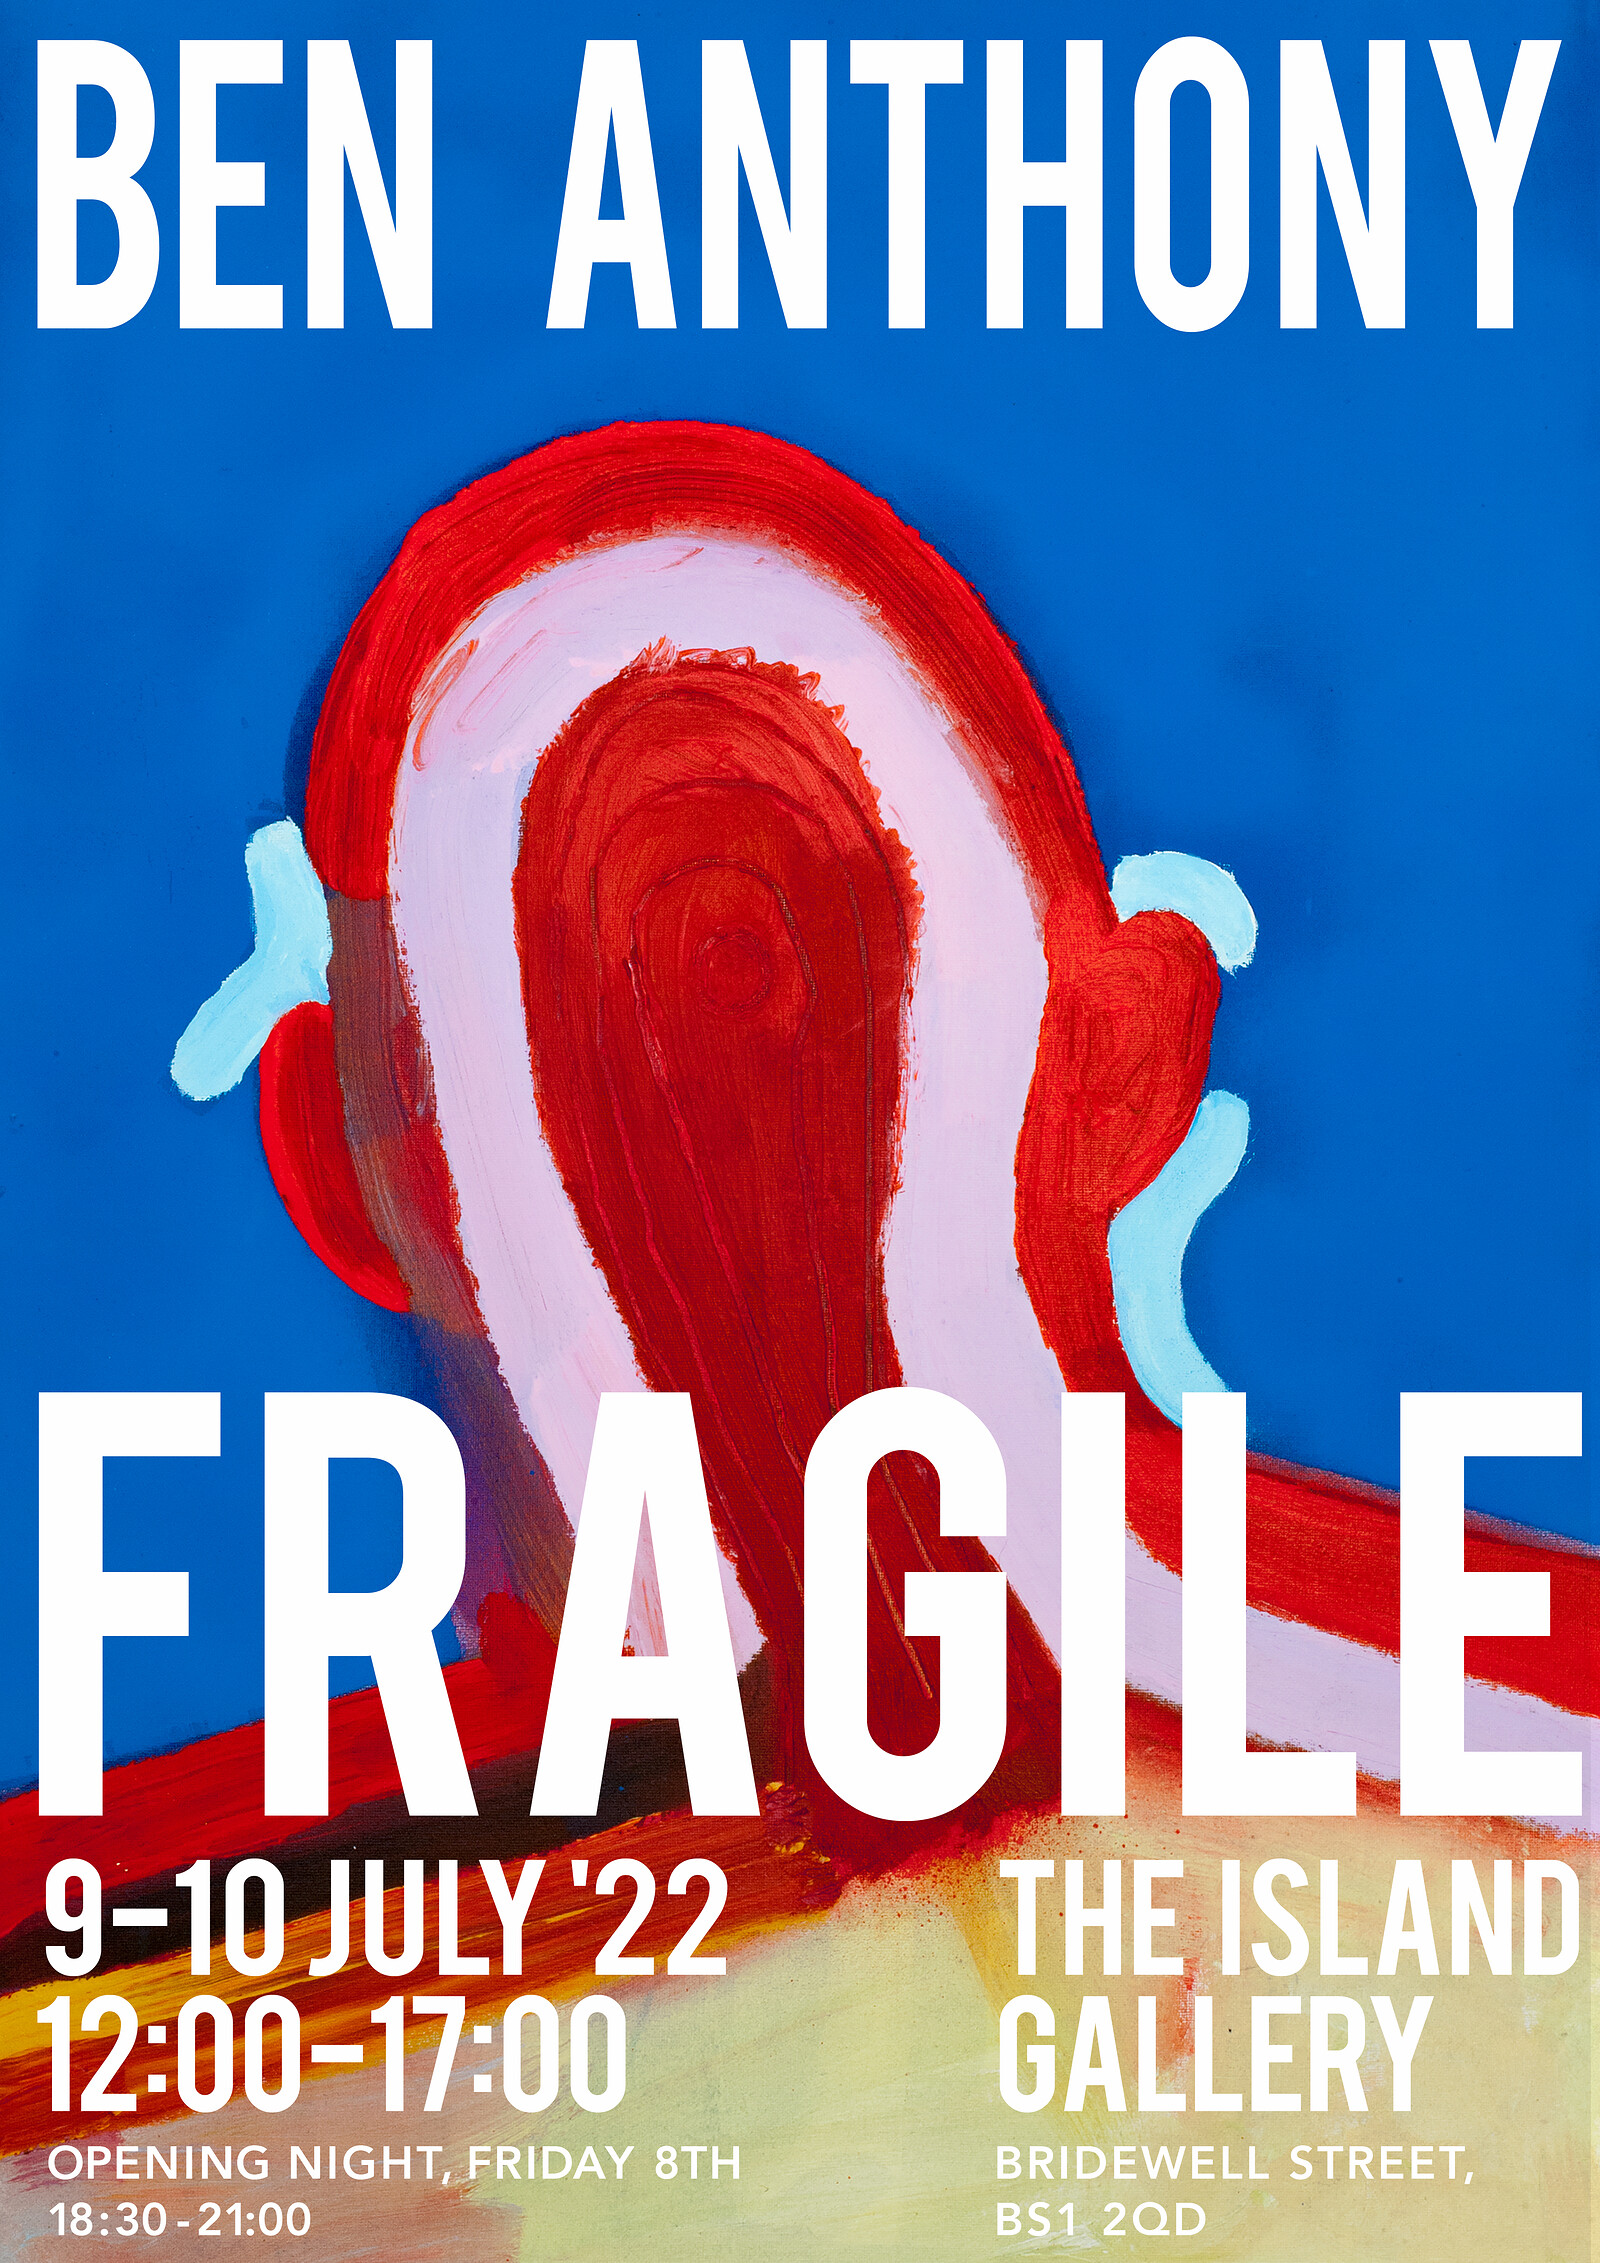 Ben Anthony: Fragile at The Island